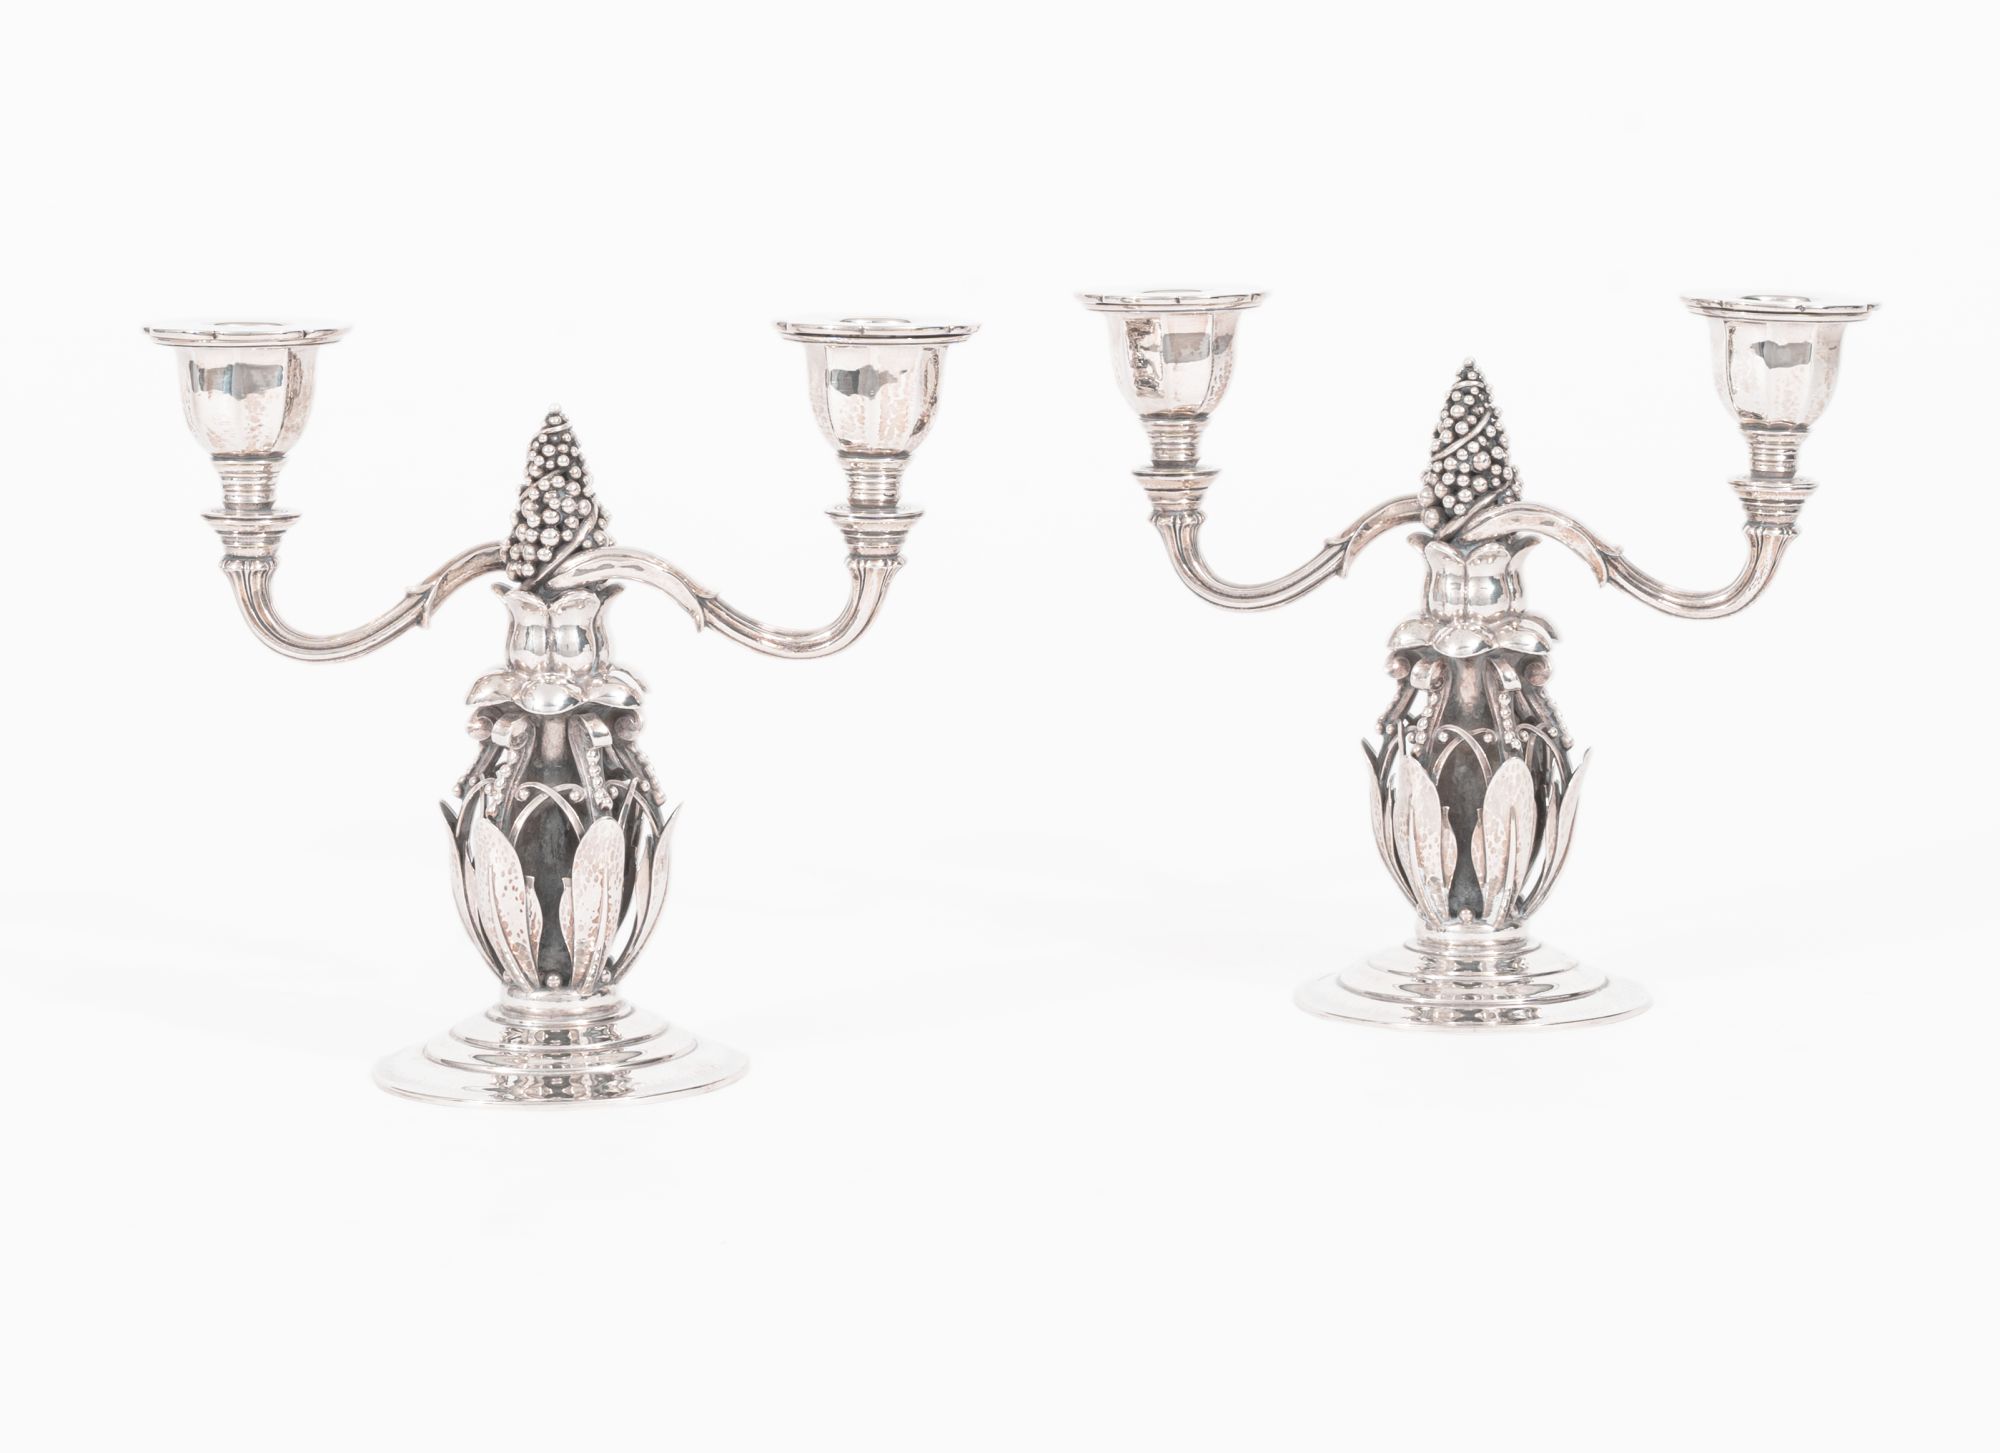 A Pair of Two-armed Candelabras No. 244